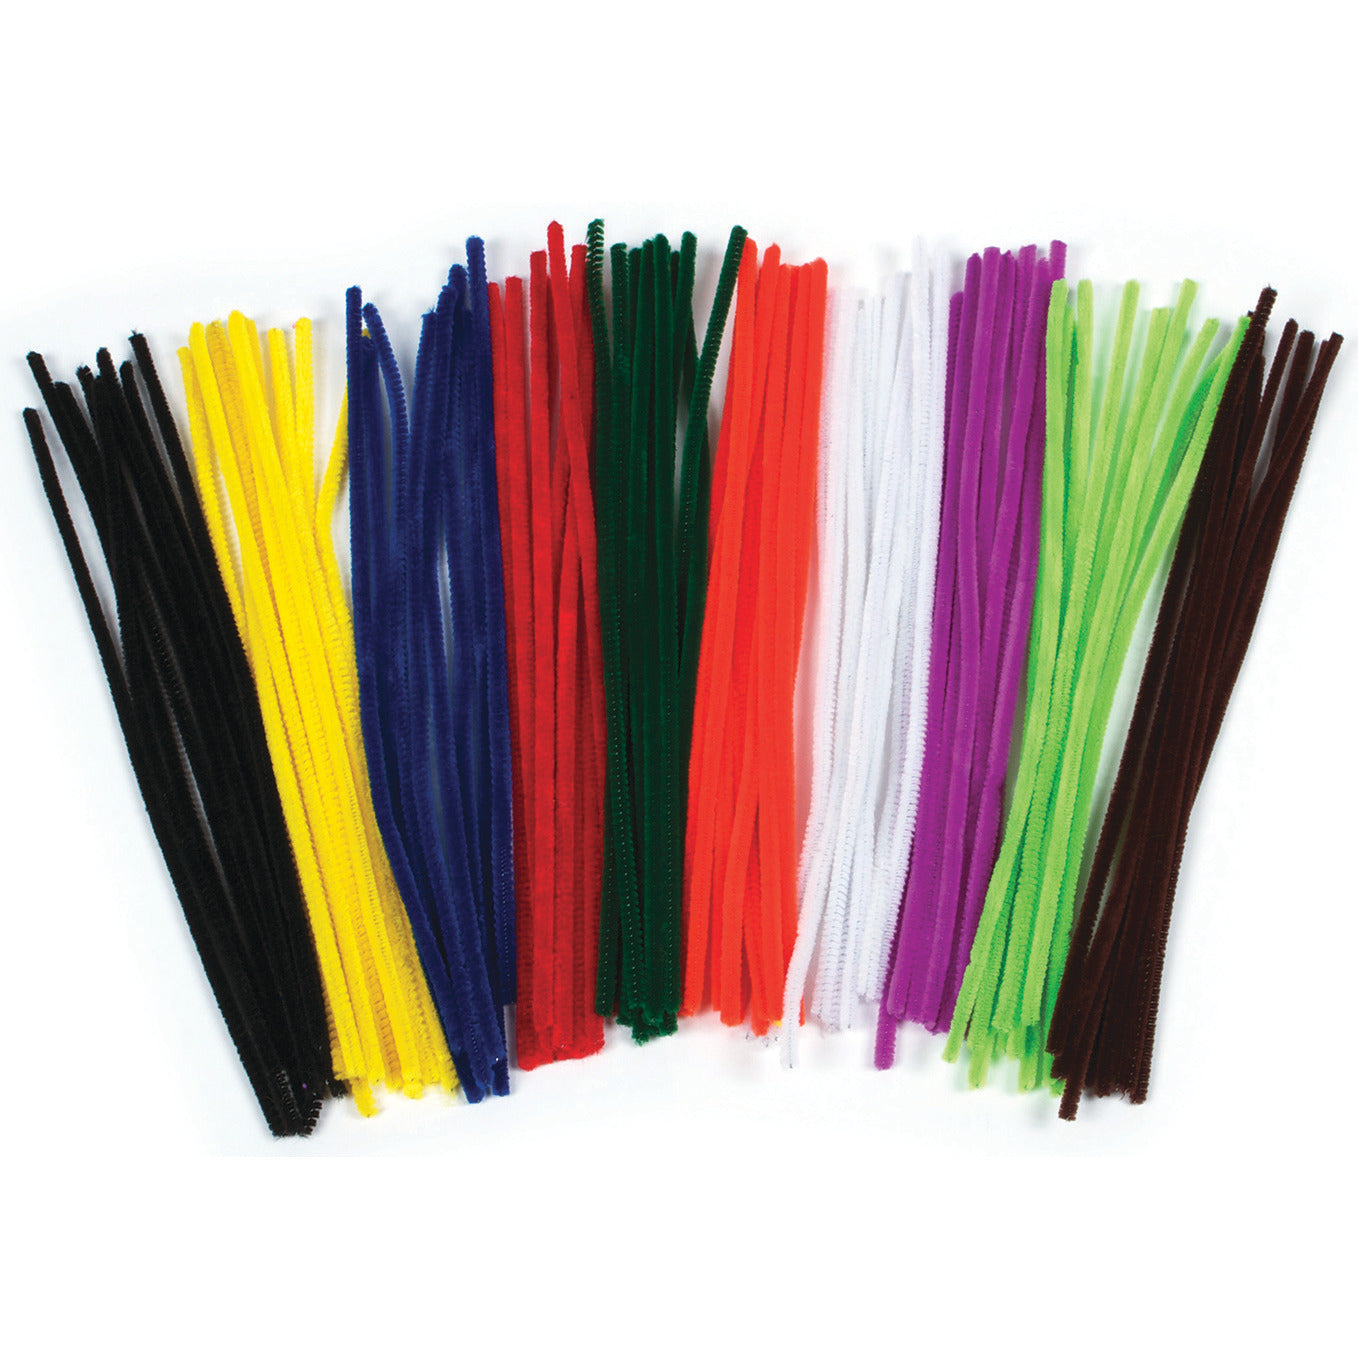 Iridescent White Chenille Pipe Cleaners, 25ct. by Creatology™